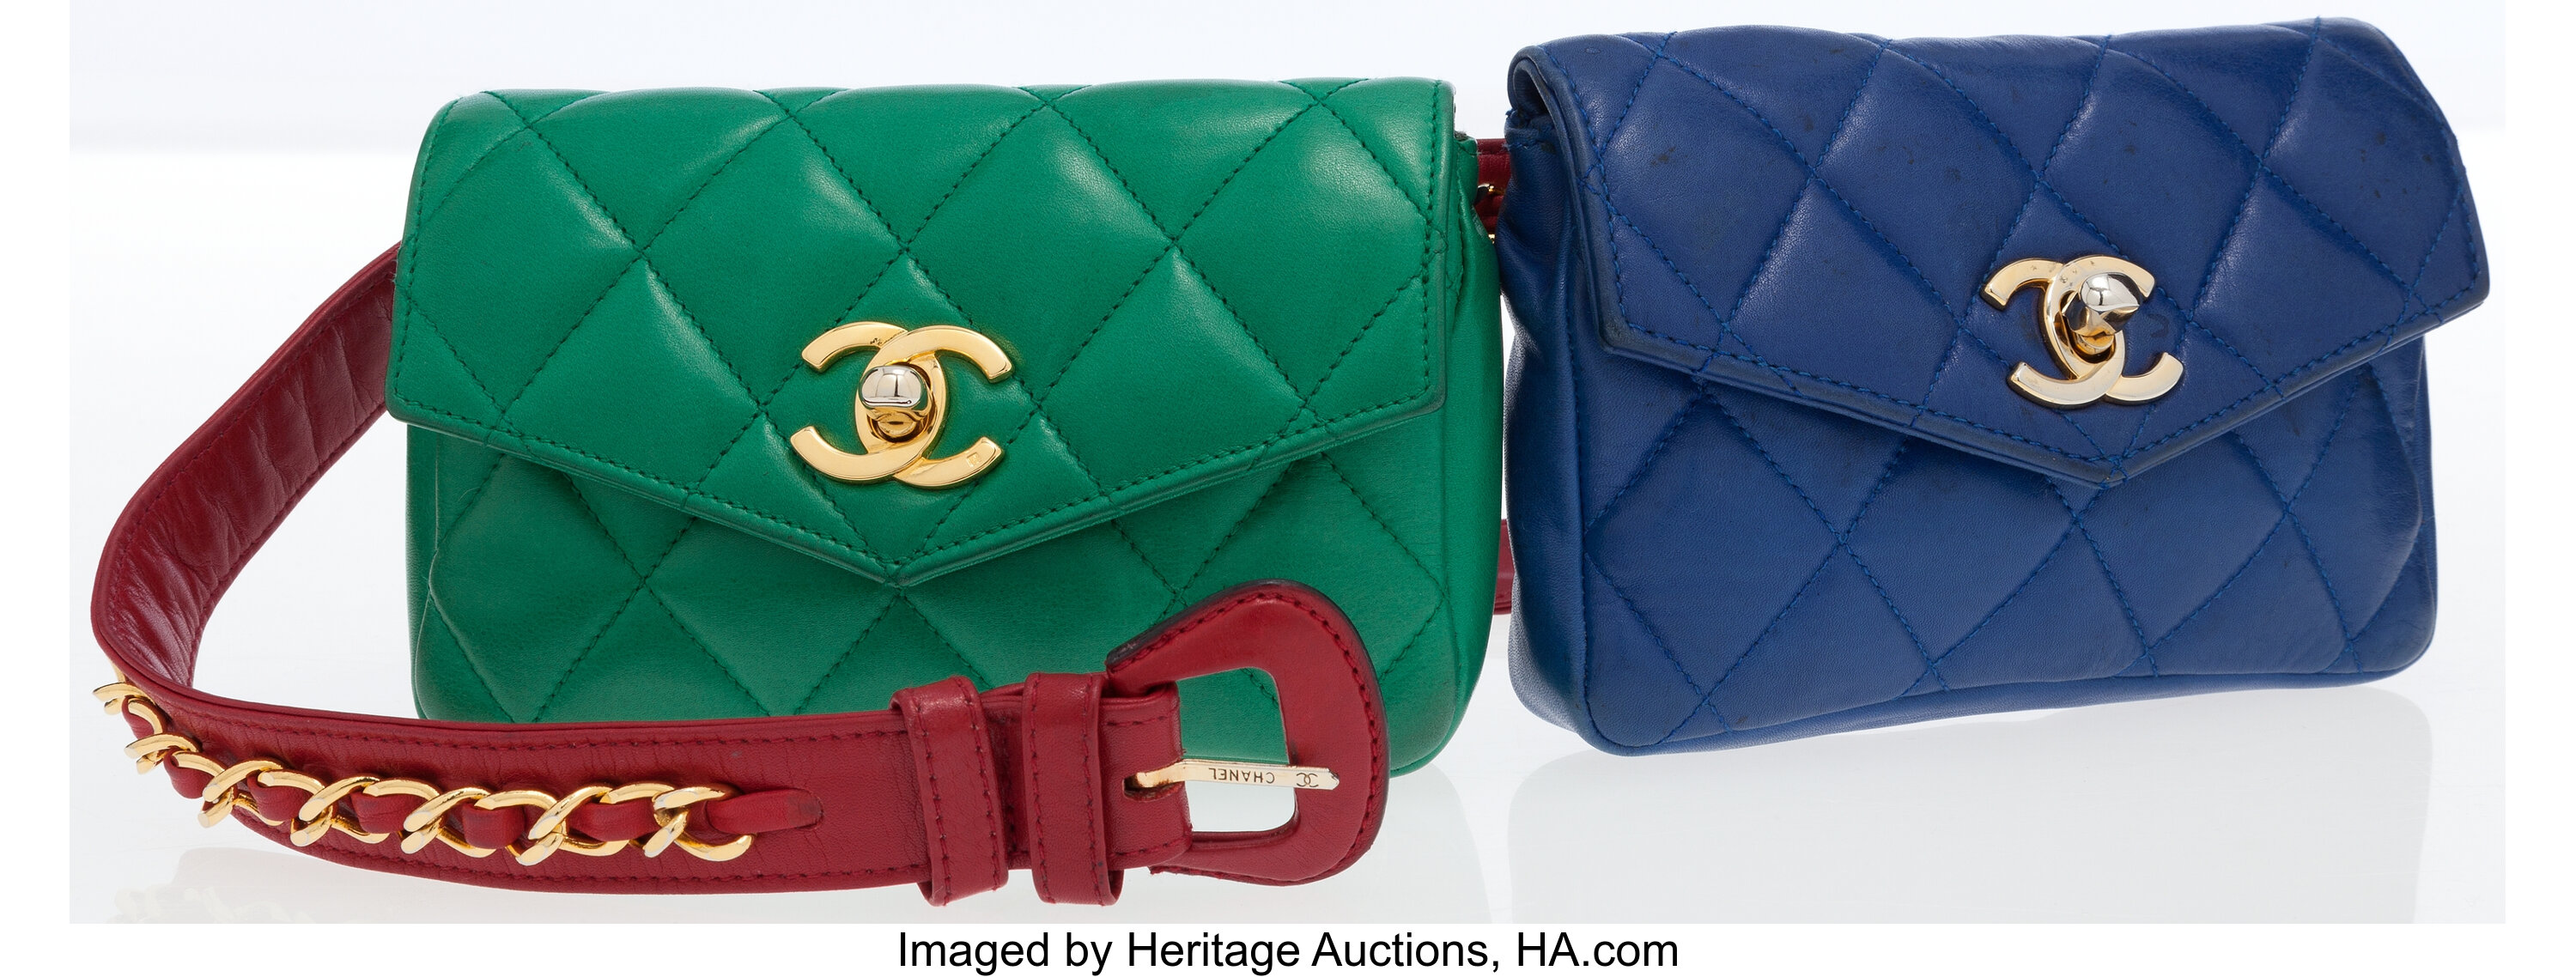 Chanel, Leather belt bag in red/Blue/green with gold hardware